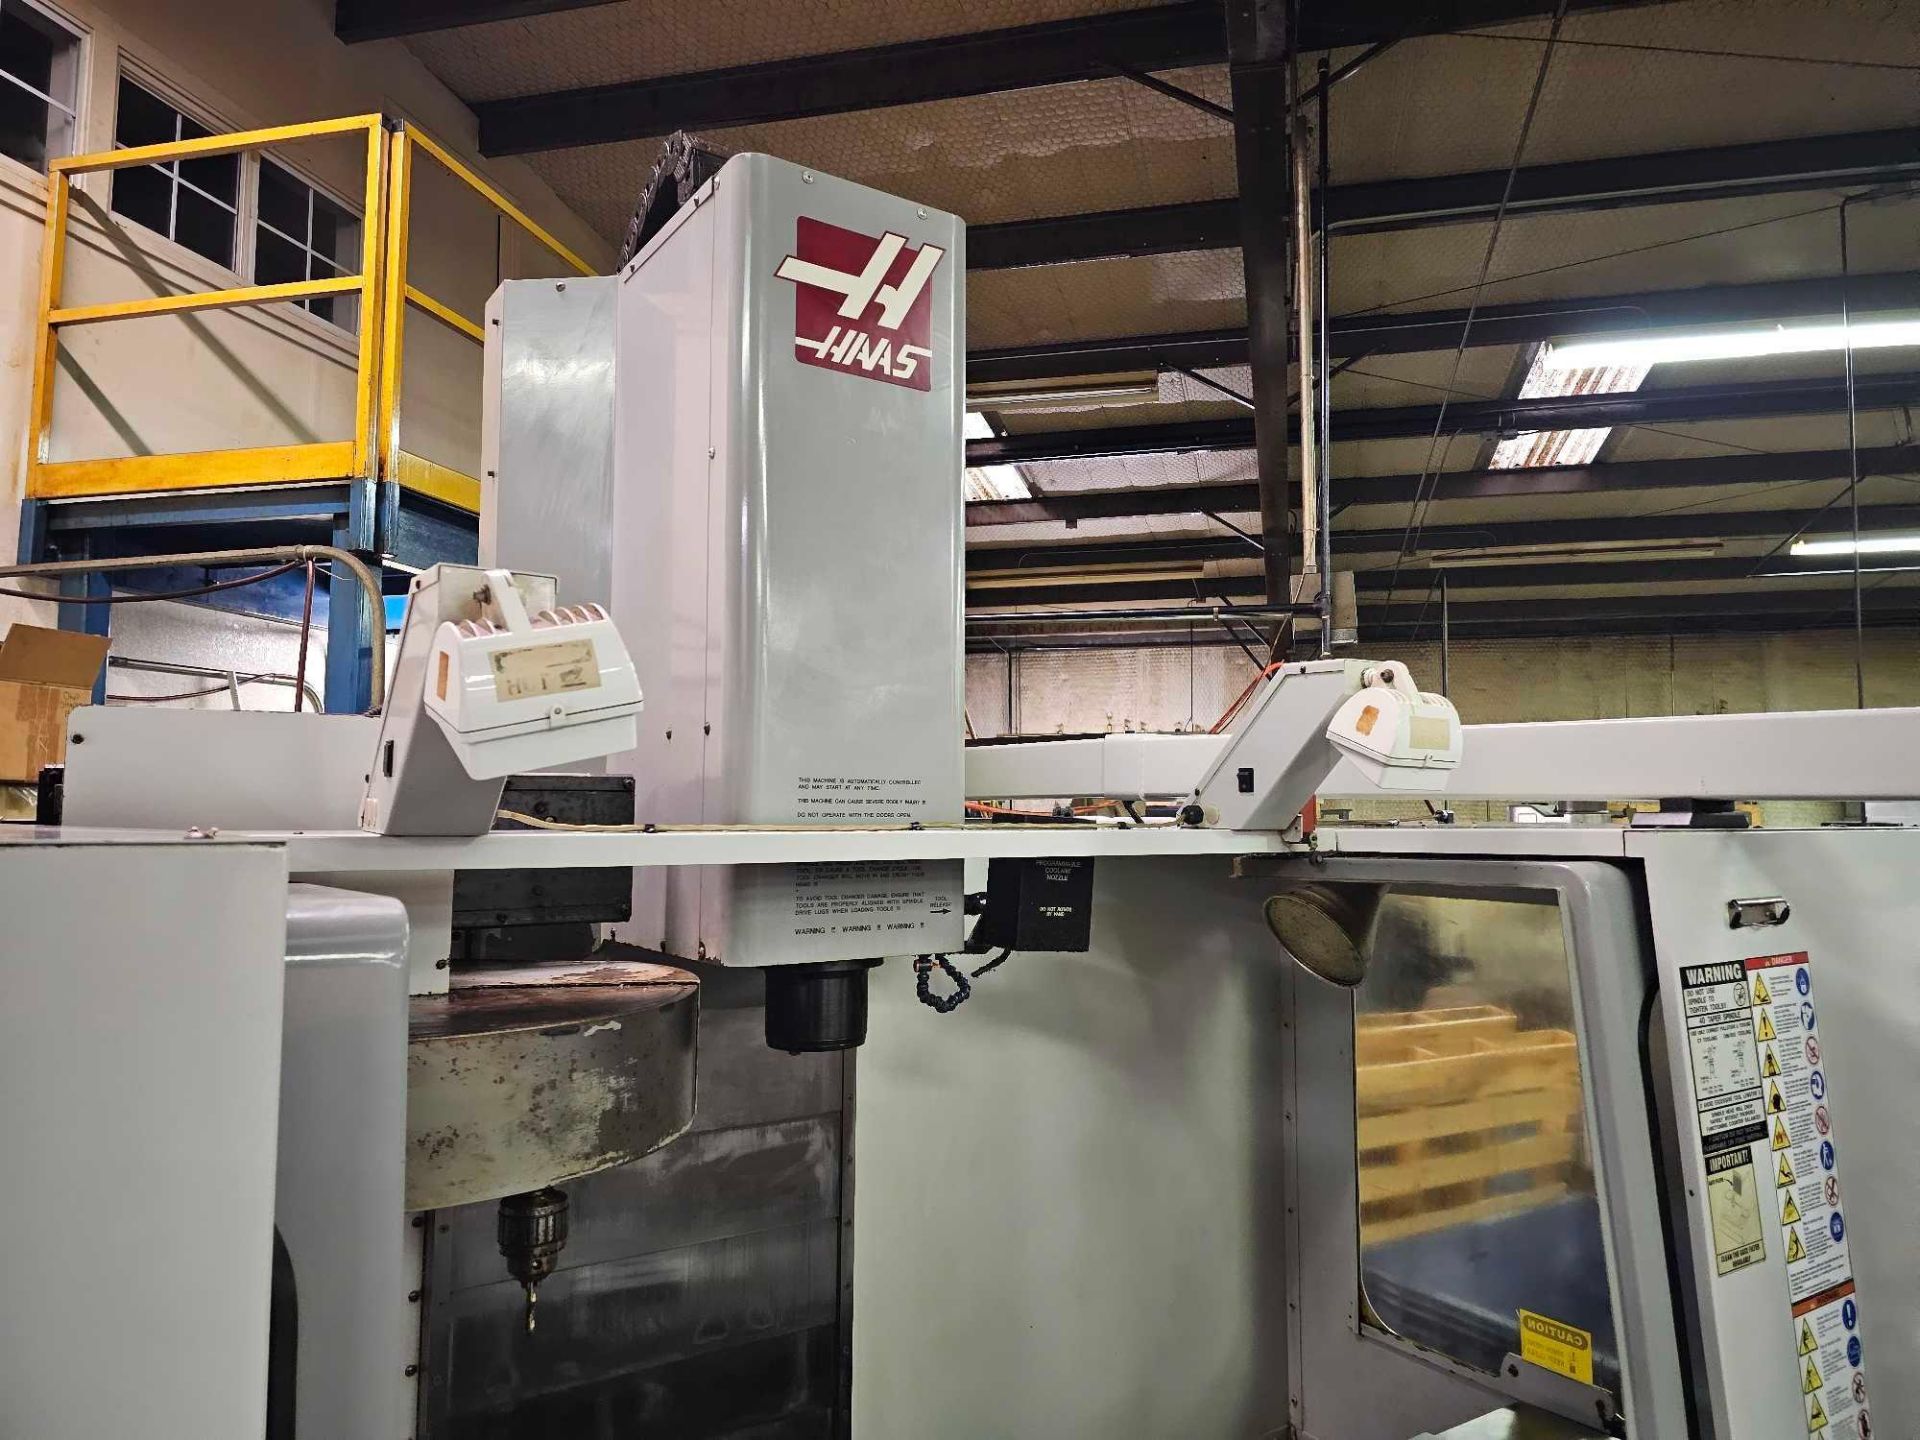 2000 HAAS VF-3 VERTICAL MACHINING CENTER WITH THROUGH SPINDLE COOLANT - Image 9 of 17